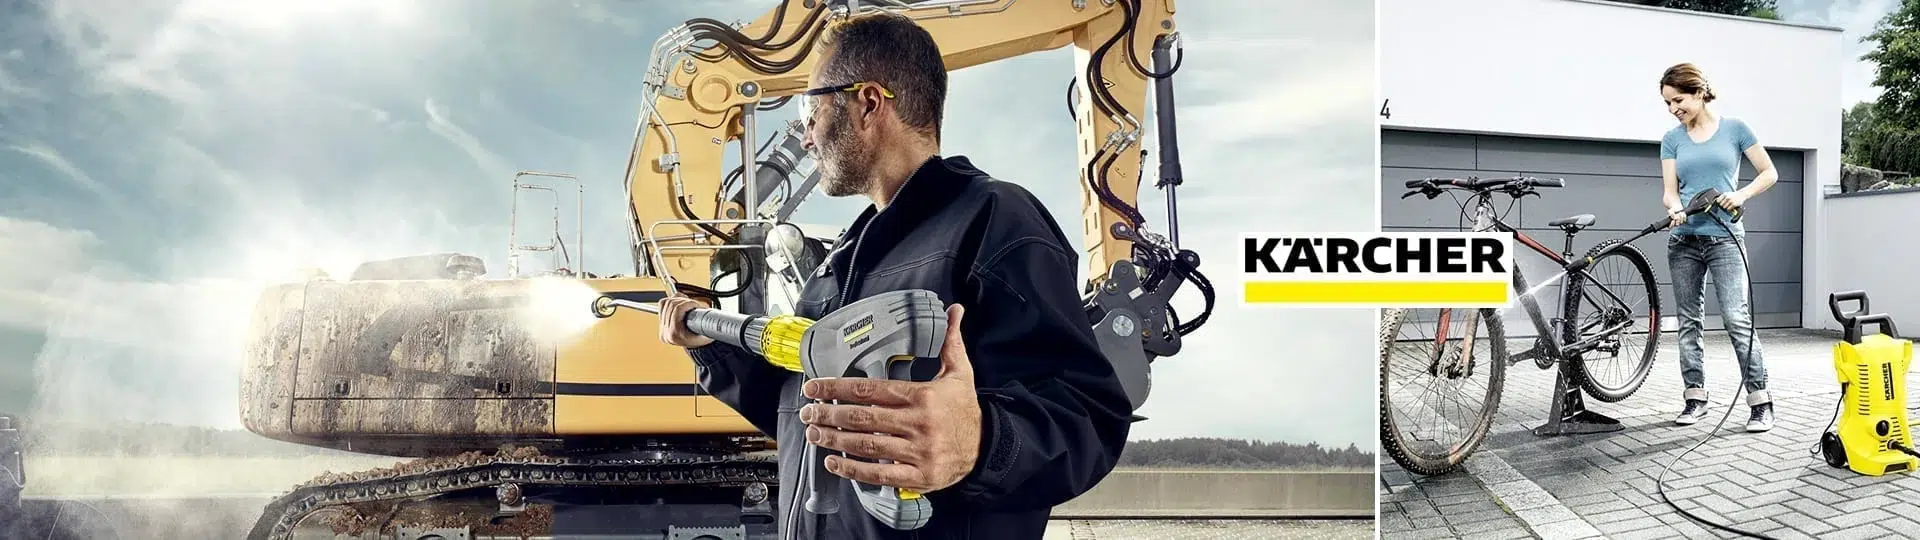 A male worker uses a high-pressure washer on a dirty excavator and a female cleans a bicycle, both using kärcher equipment. the setting is outdoors and the equipment efficiently removes dirt.